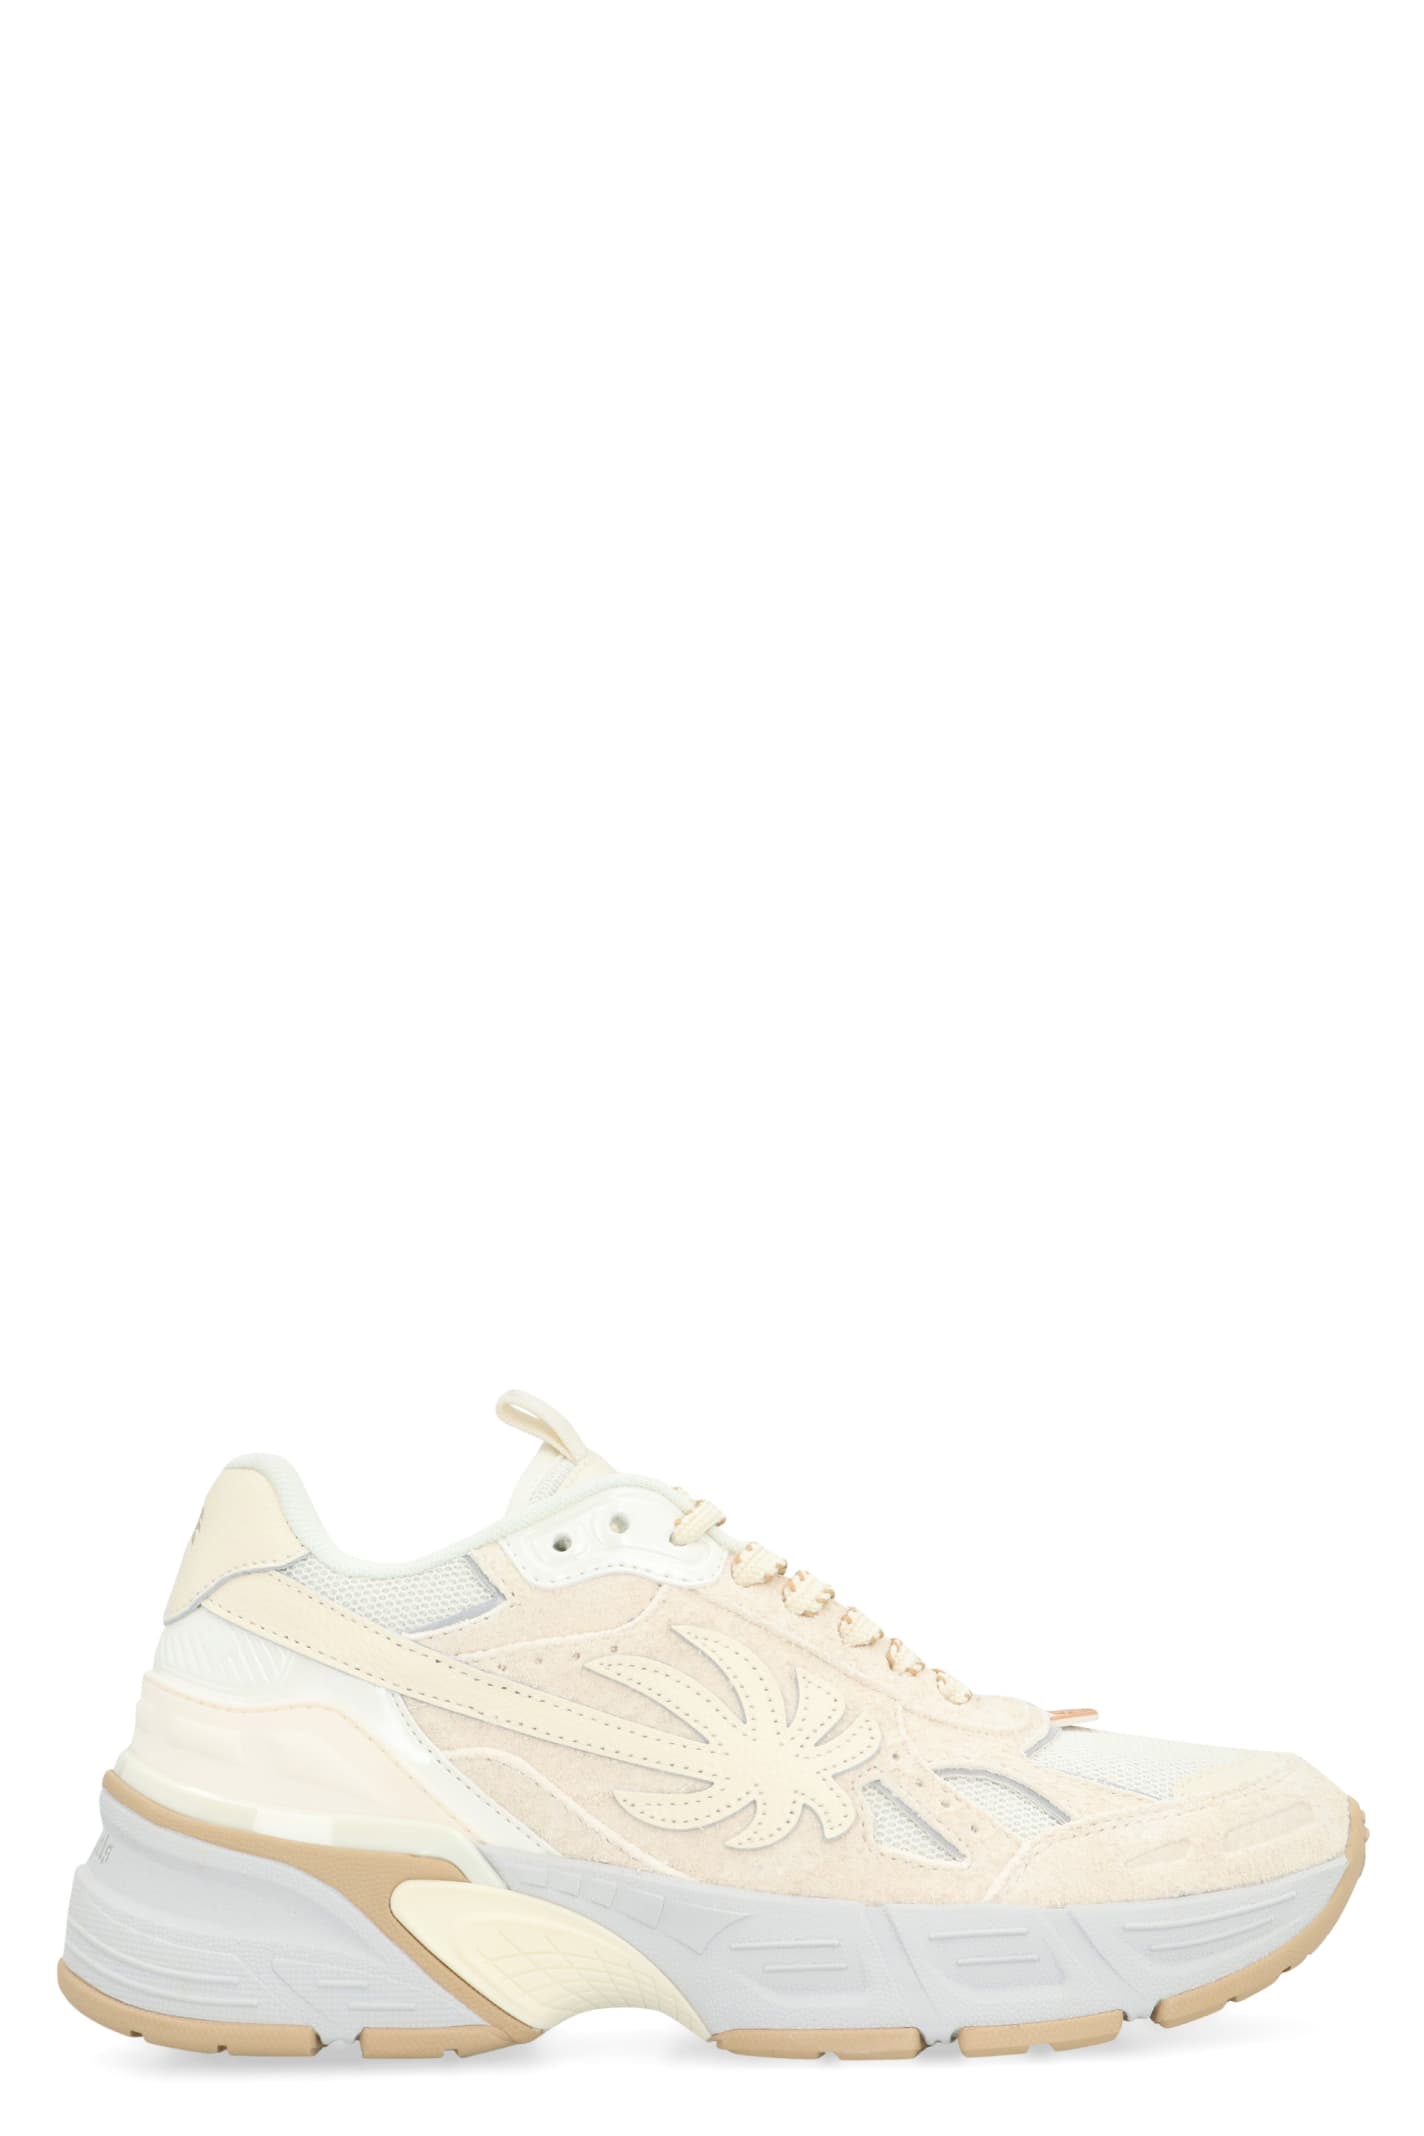 Palm Angels Leather And Fabric Low-top Sneakers In Ivory